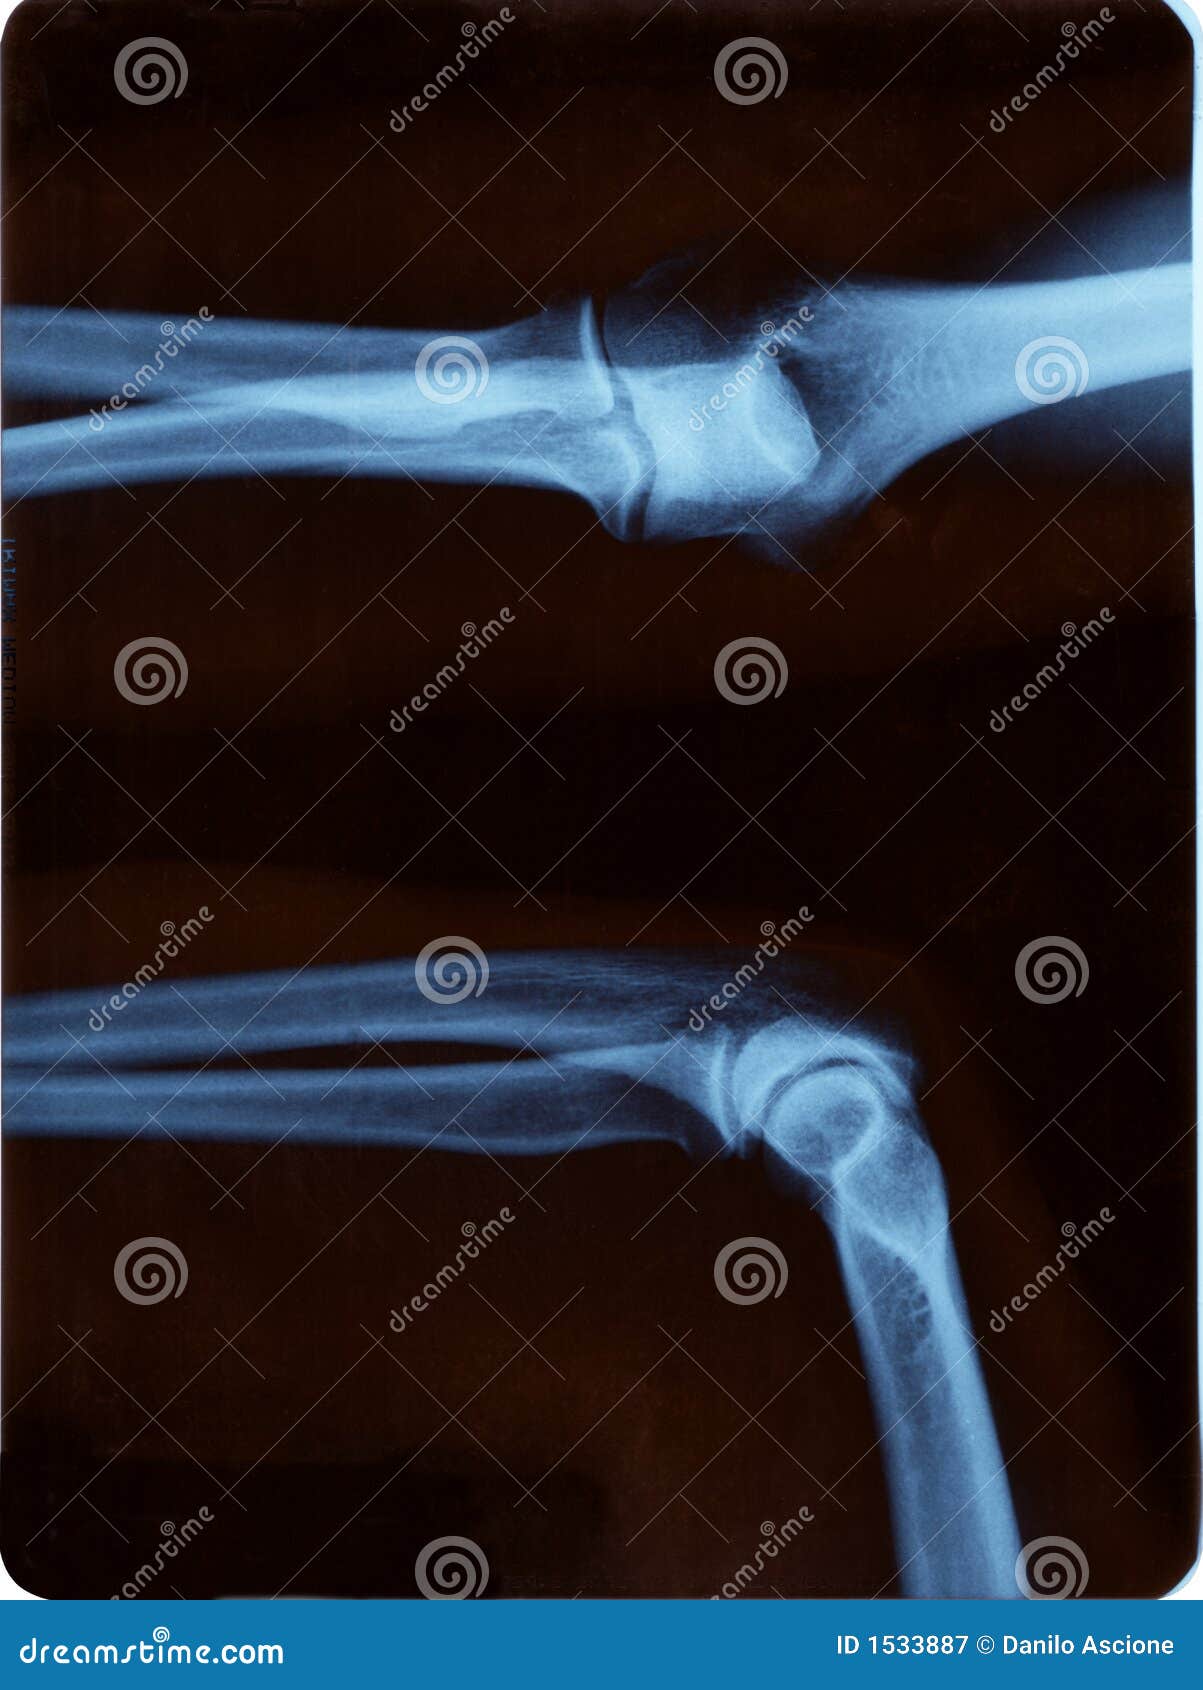 elbow radiography